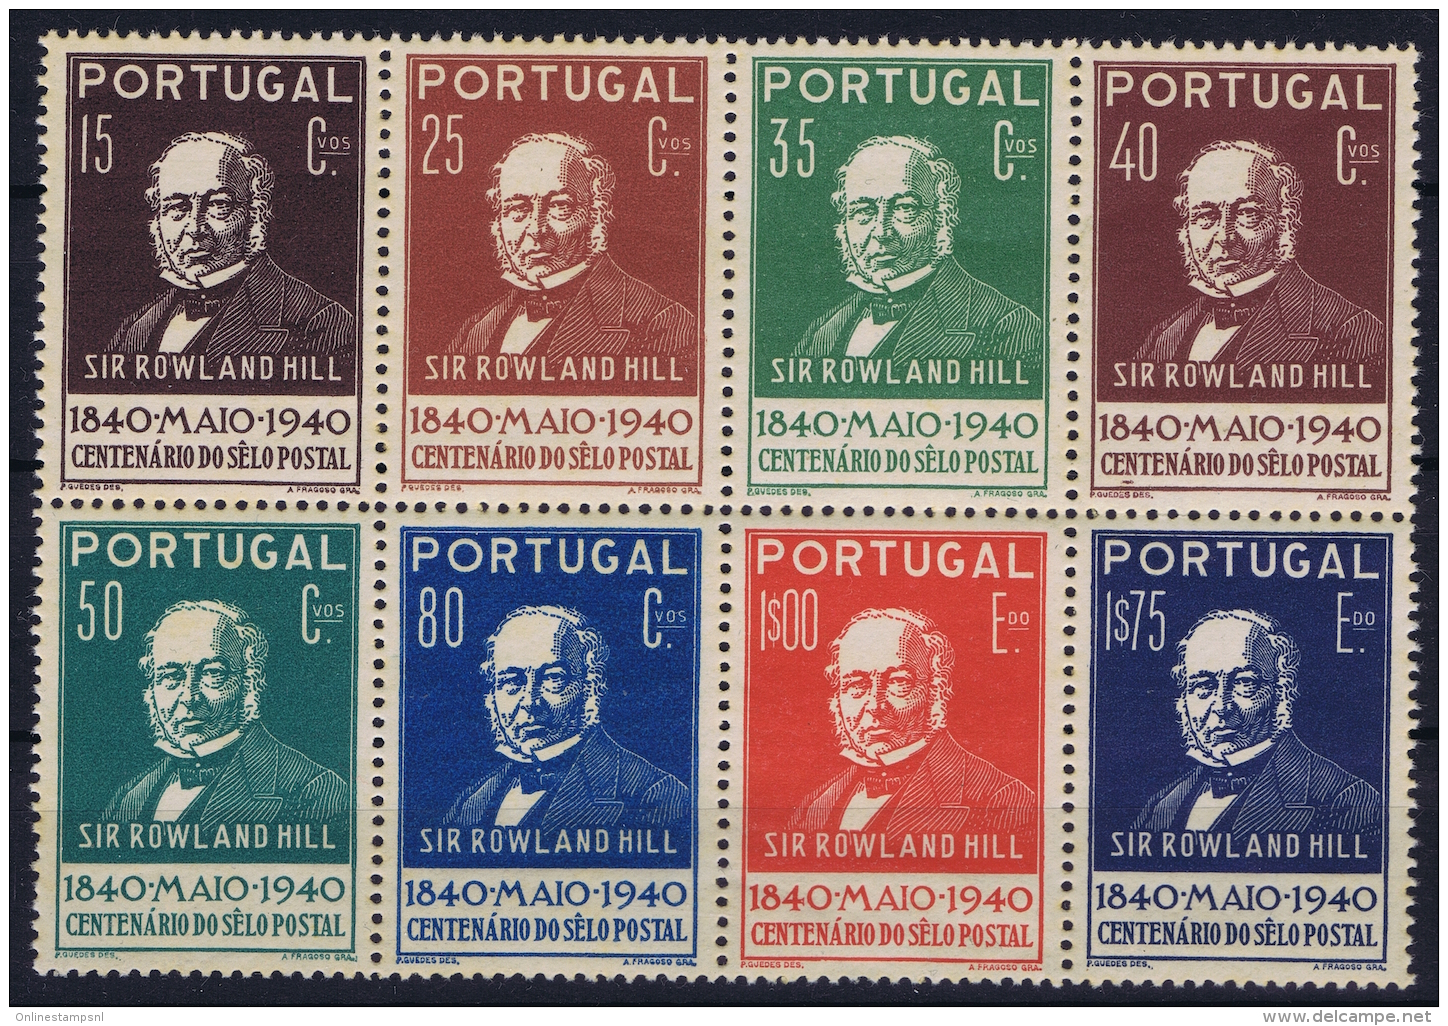 Portugal: Mi Nr 622 - 629  MNH/**/postfrisch/neuf Sans Charniere  1940 Some Ink On Back From Printing - Nuovi